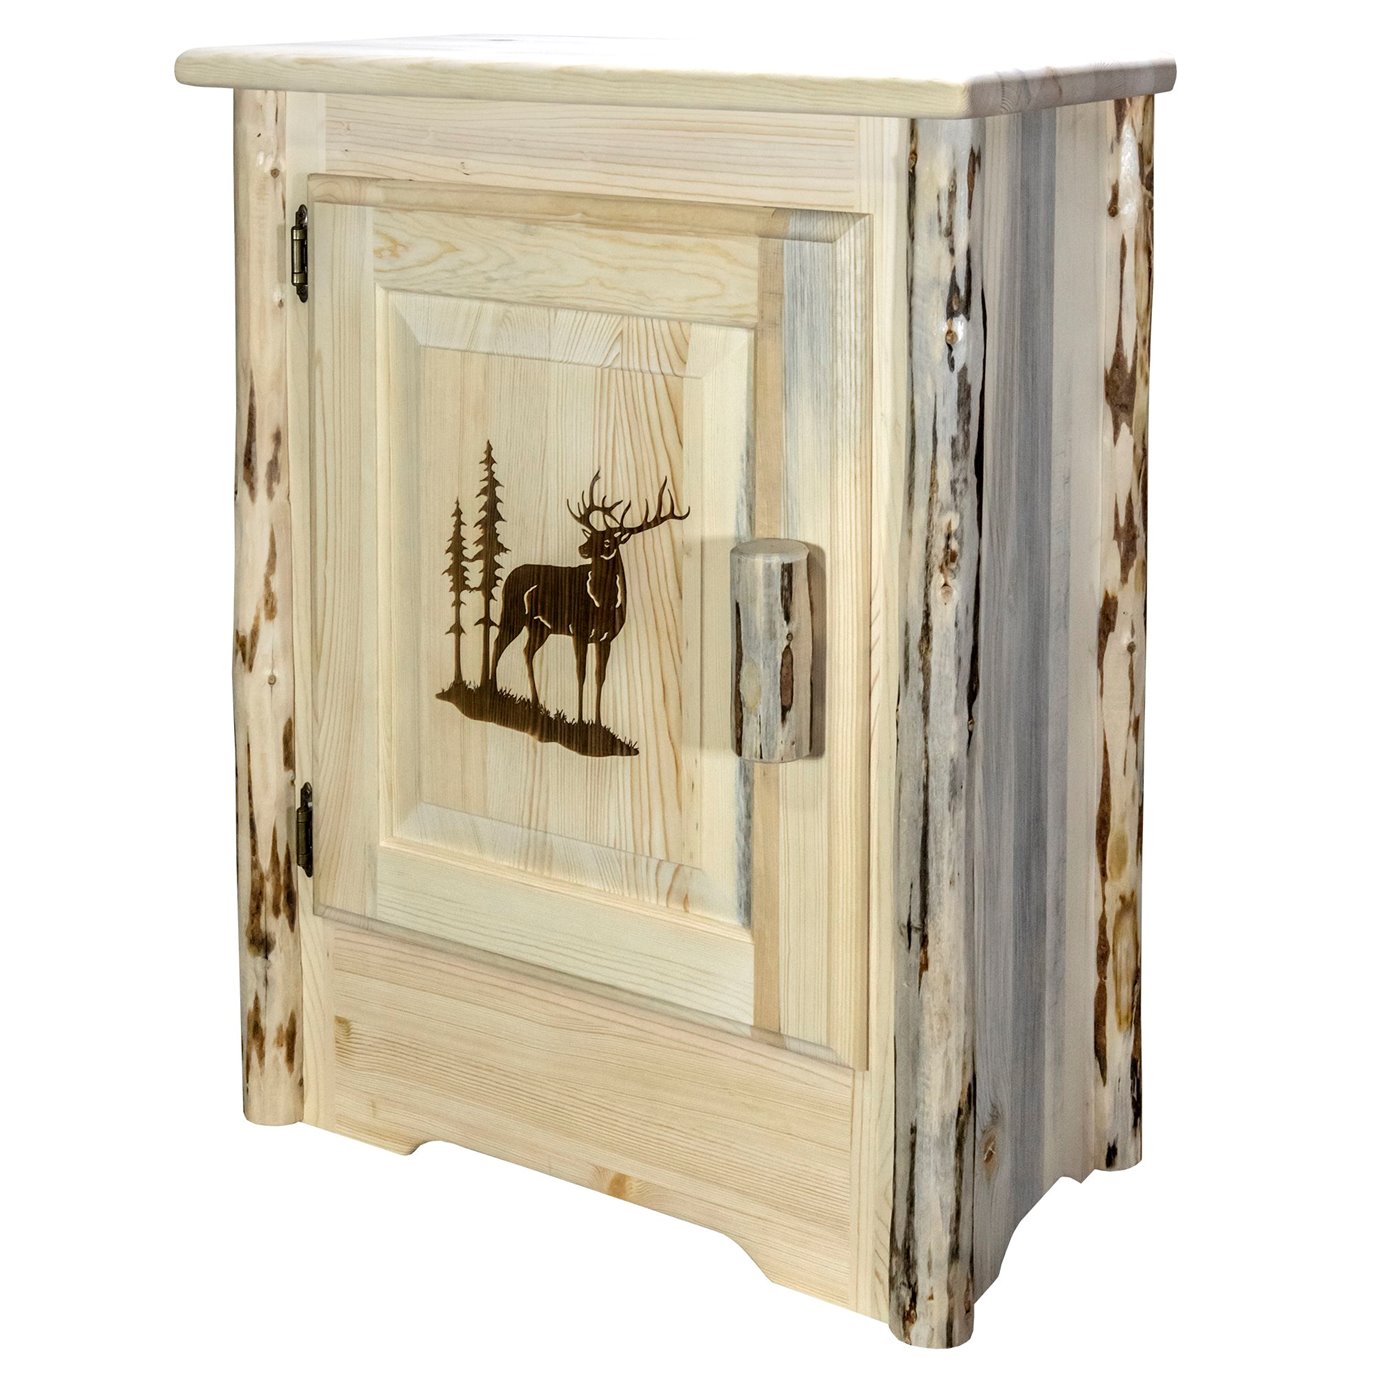 Montana Right Hinged Accent Cabinet w/ Laser Engraved Elk Design - Clear Lacquer Finish